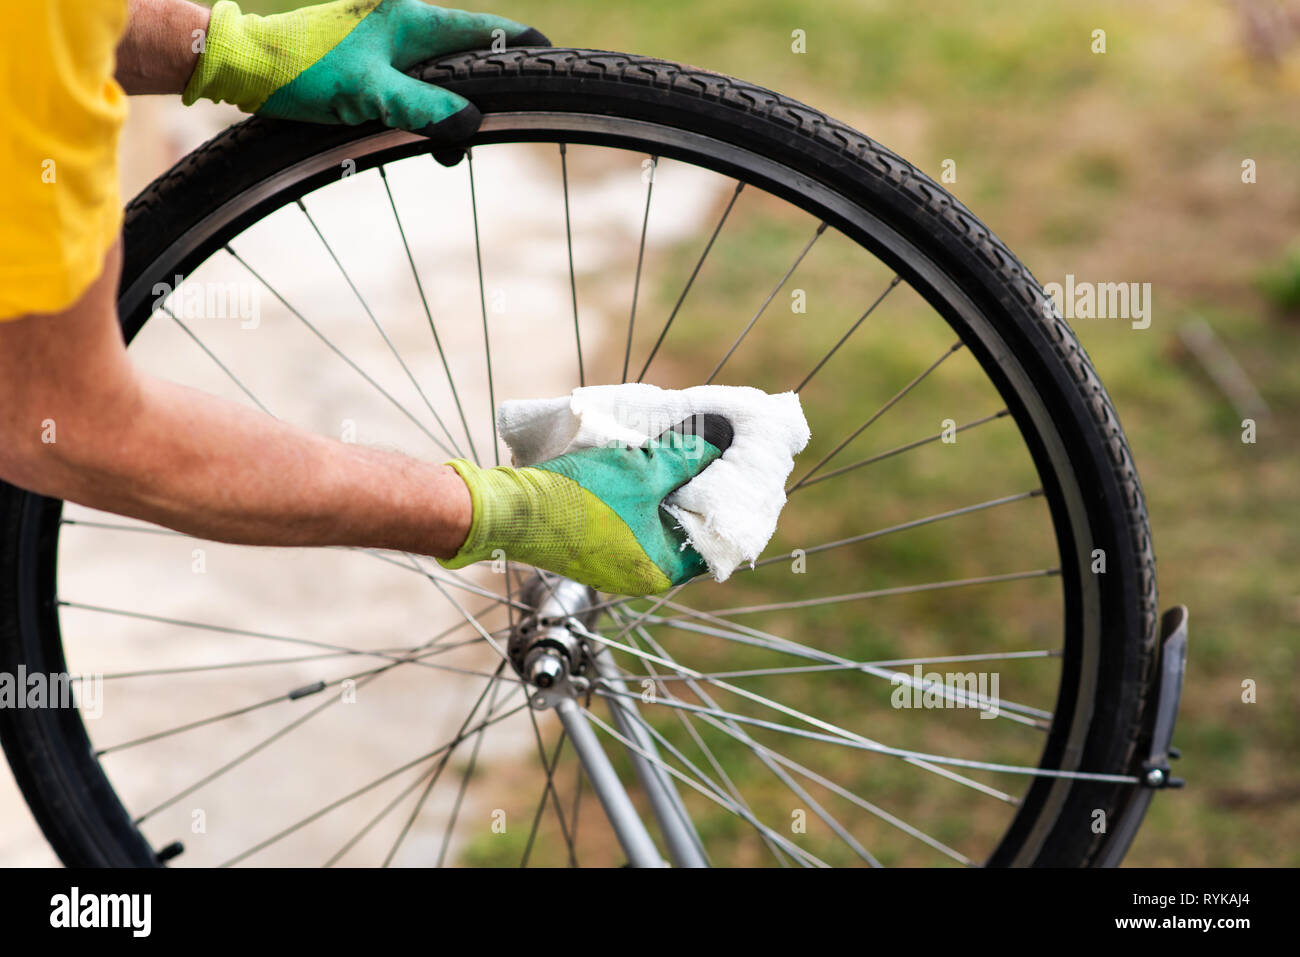 Man cleaning bicycle tire for the new season Stock Photo